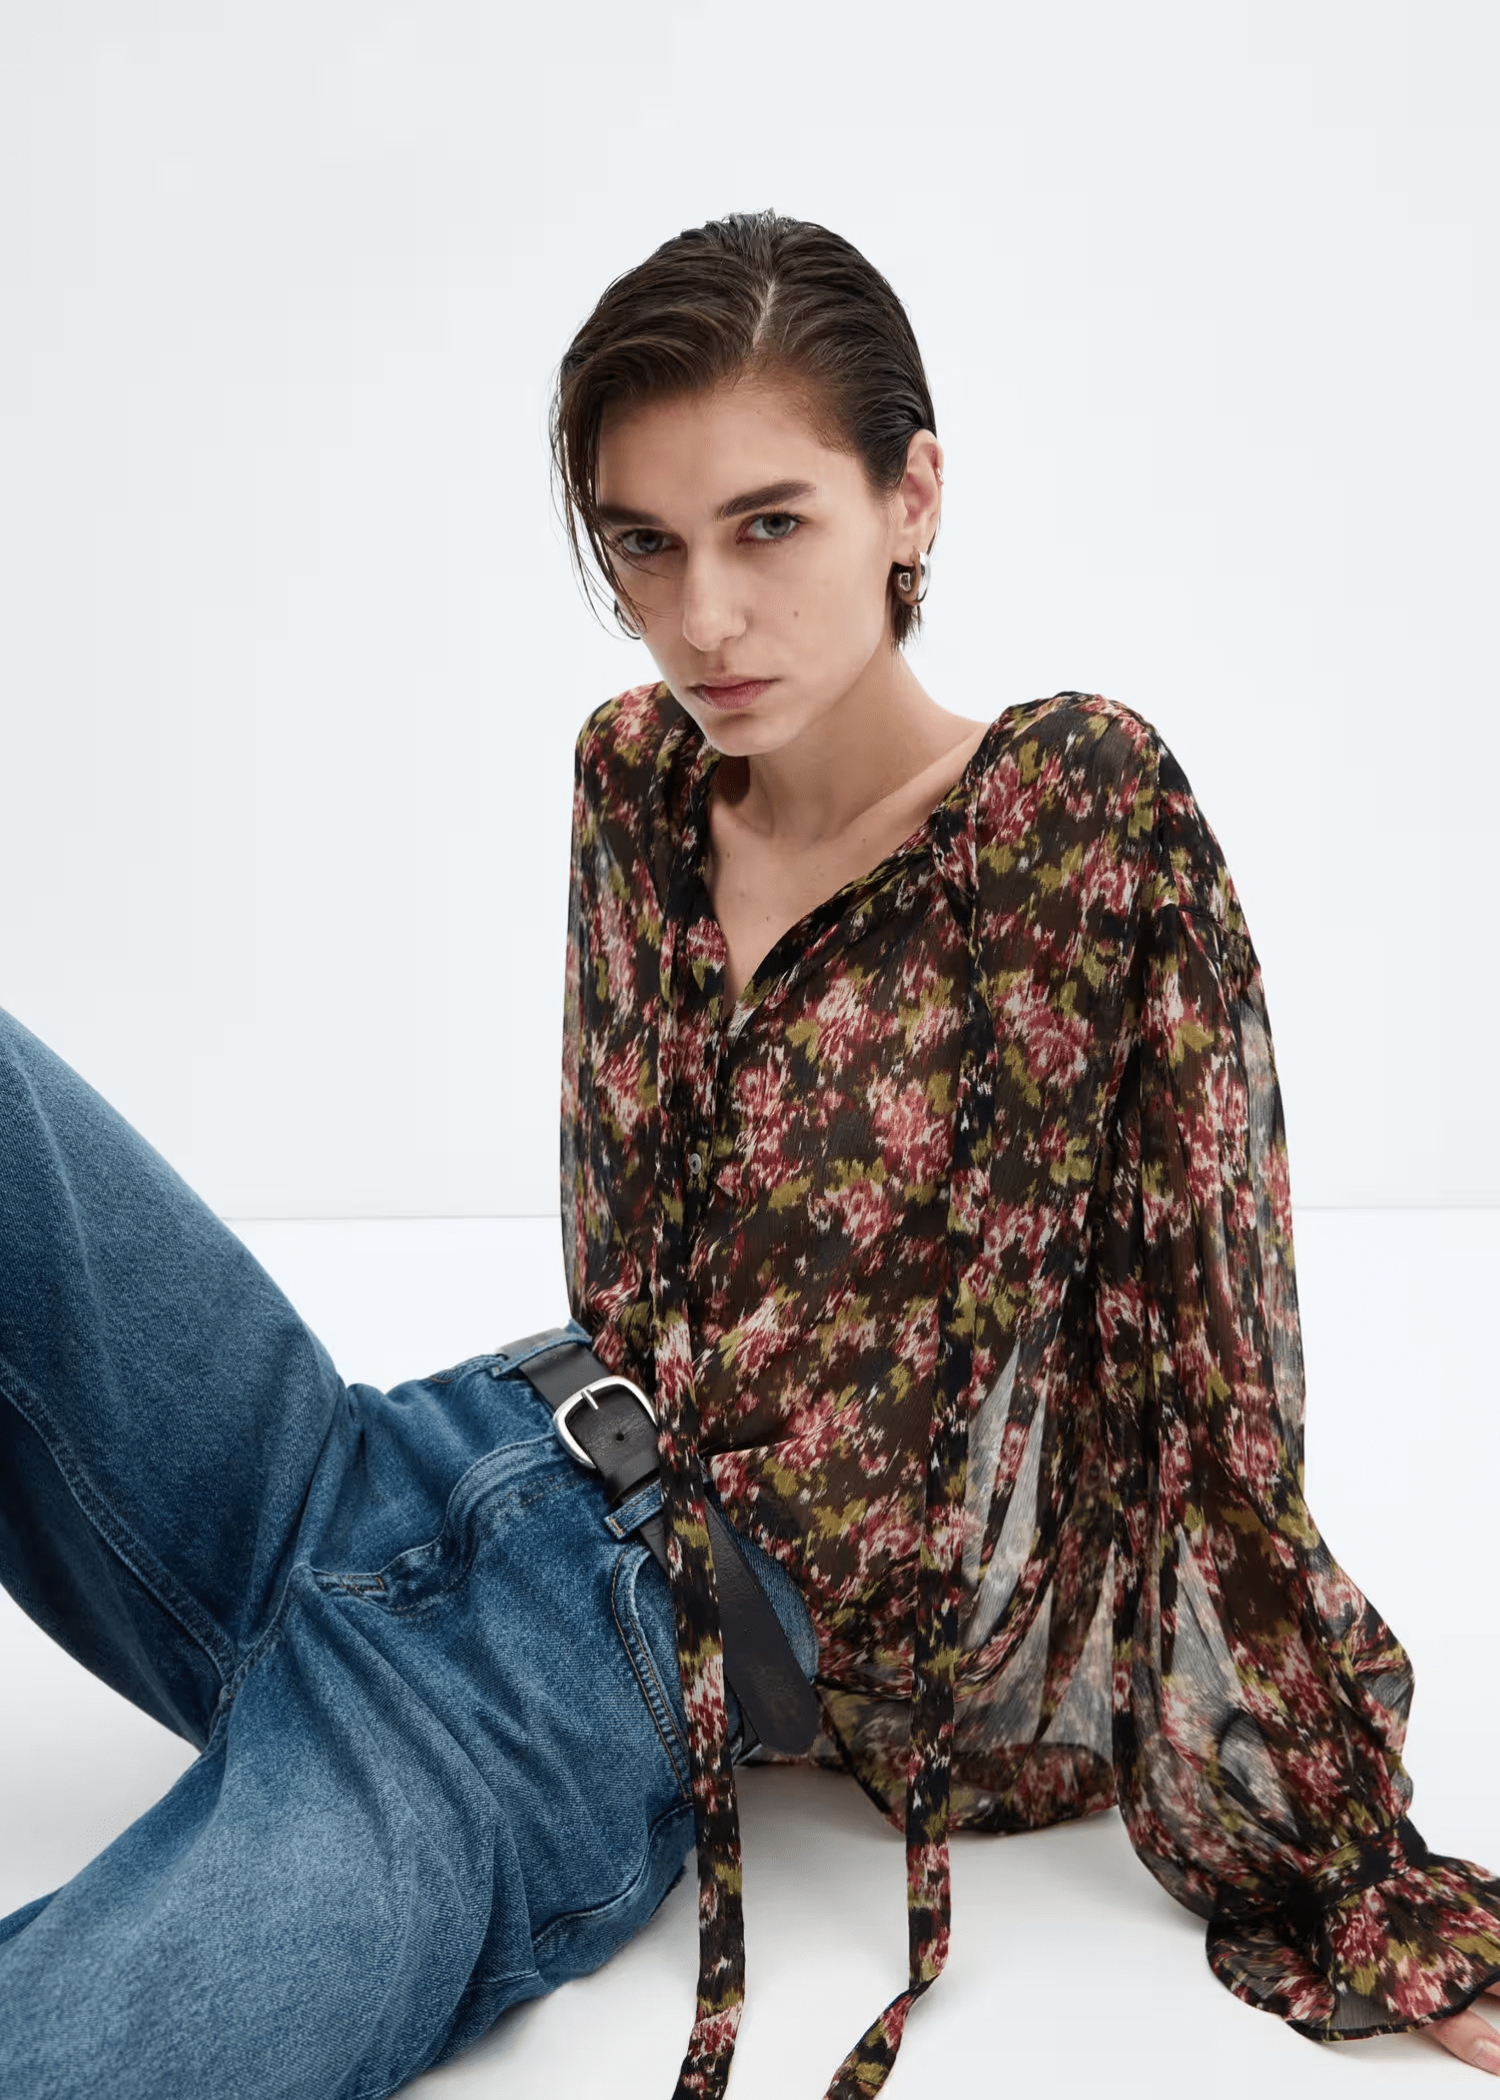 Seated woman wearing a casual look with a printed blouse and jeans.